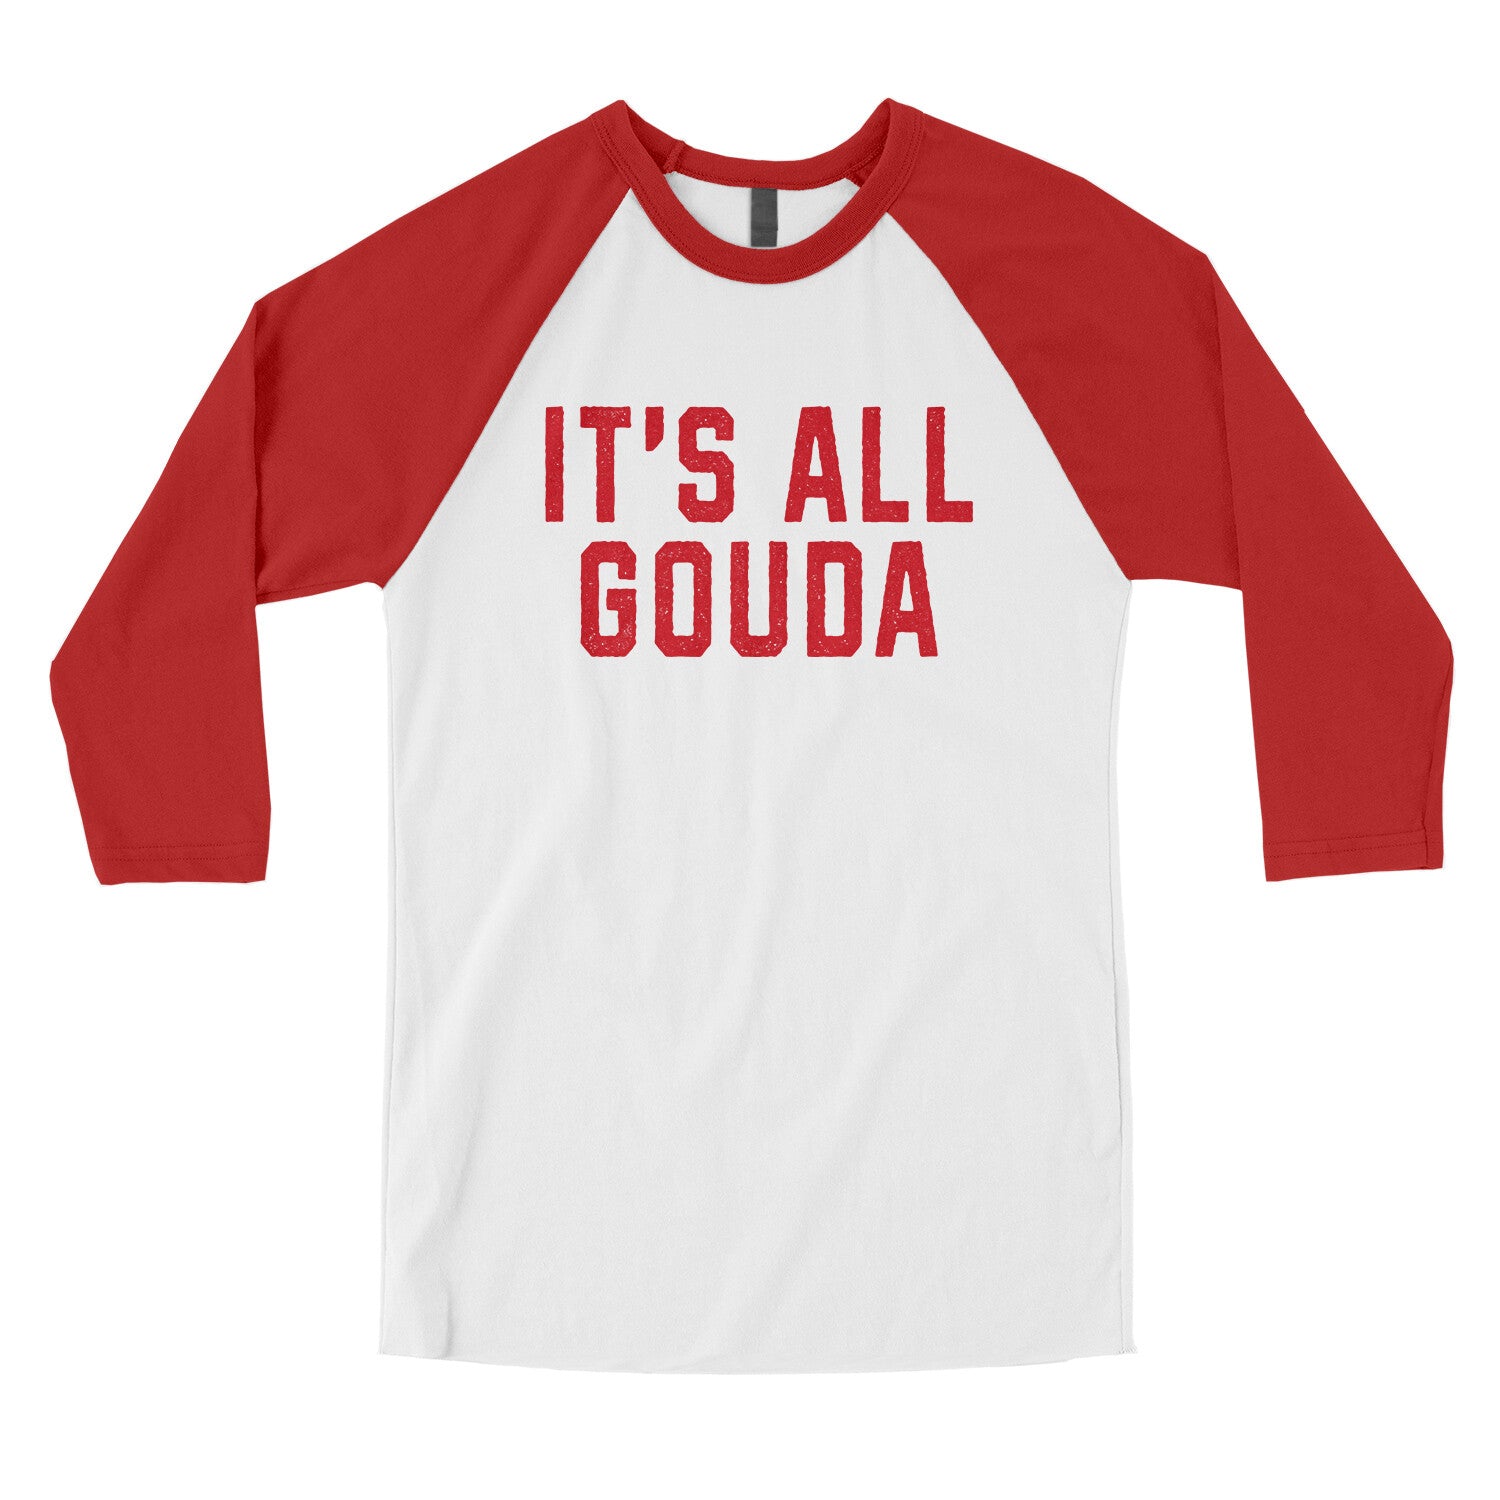 It’s All Gouda in White with Red Color